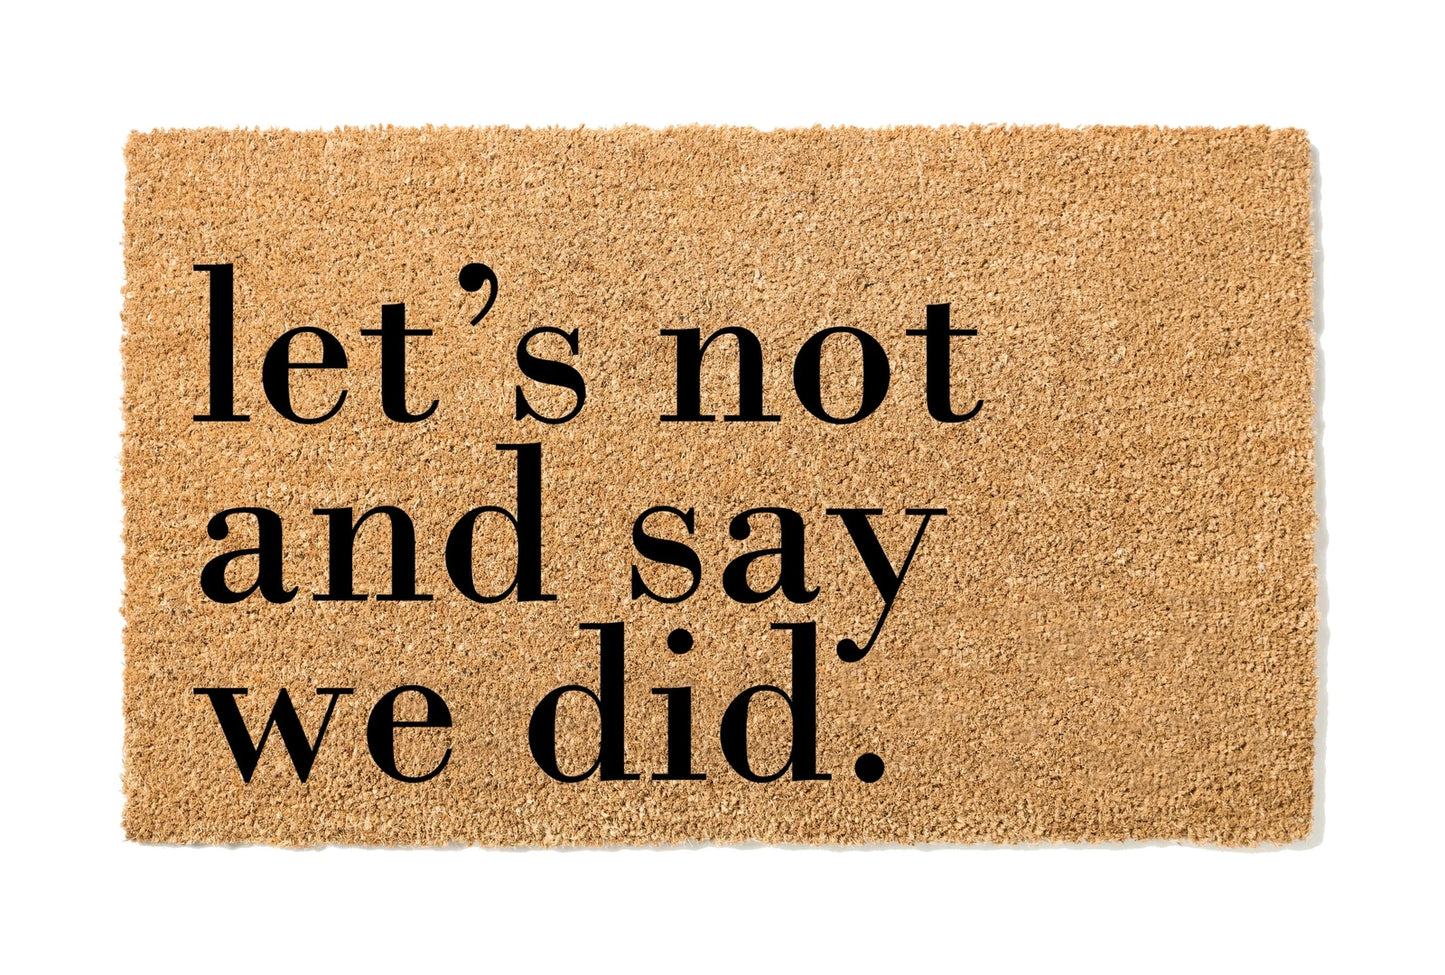 Let's Not and Say We Did Doormat